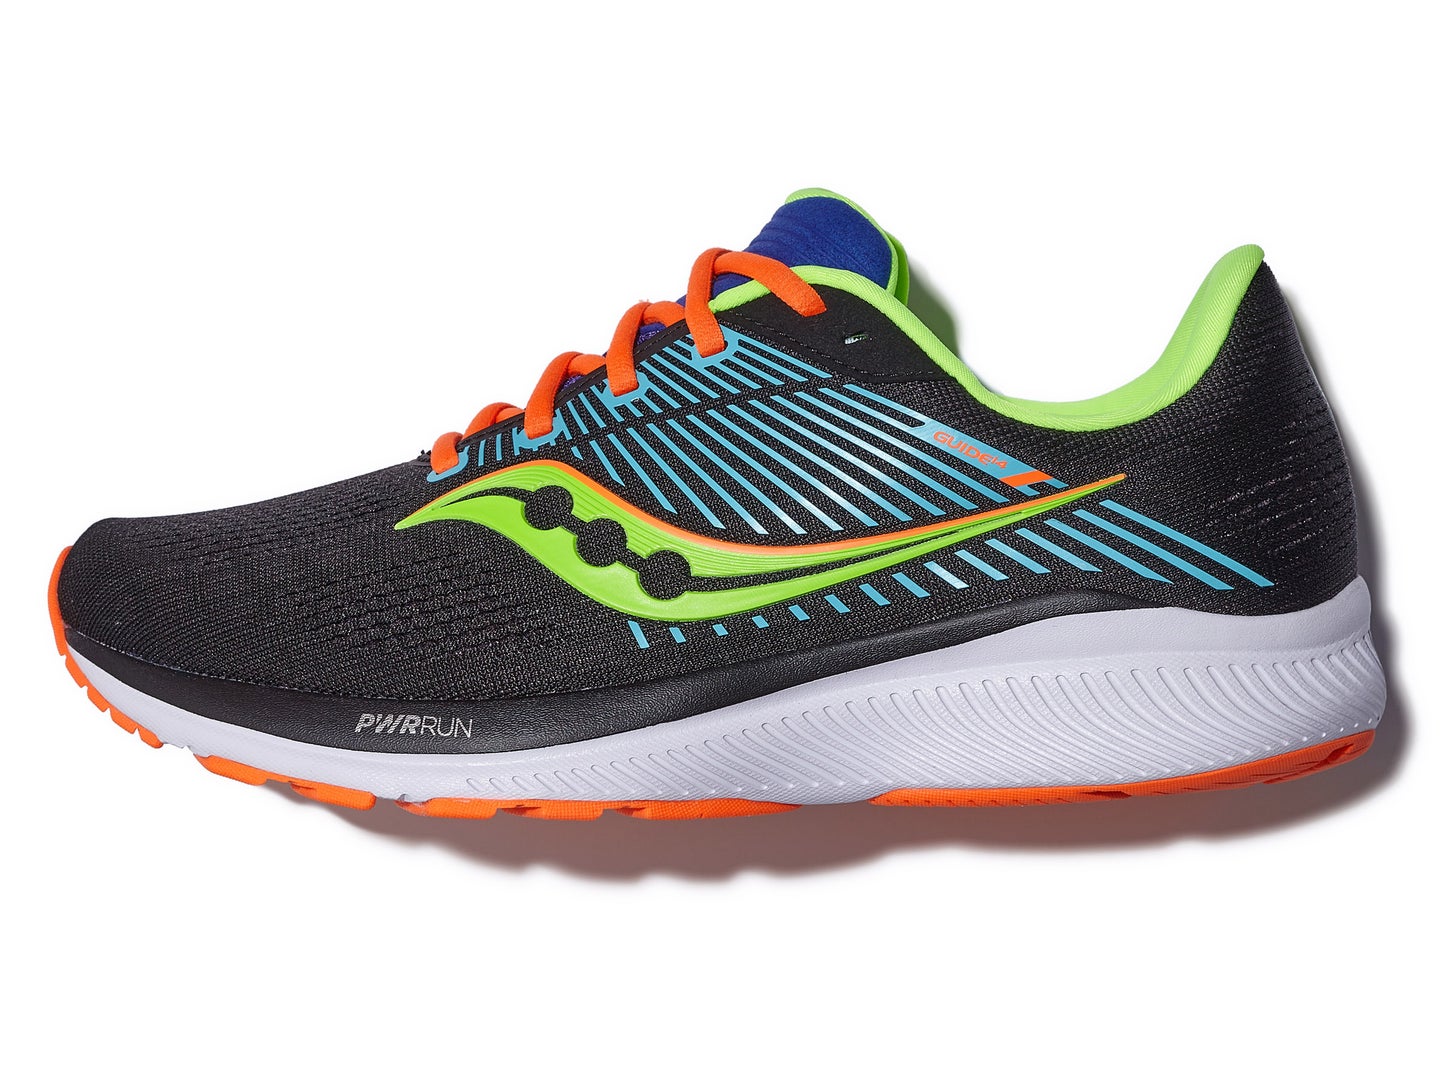 Saucony Guide 14 Shoe Review | Running Warehouse Australia